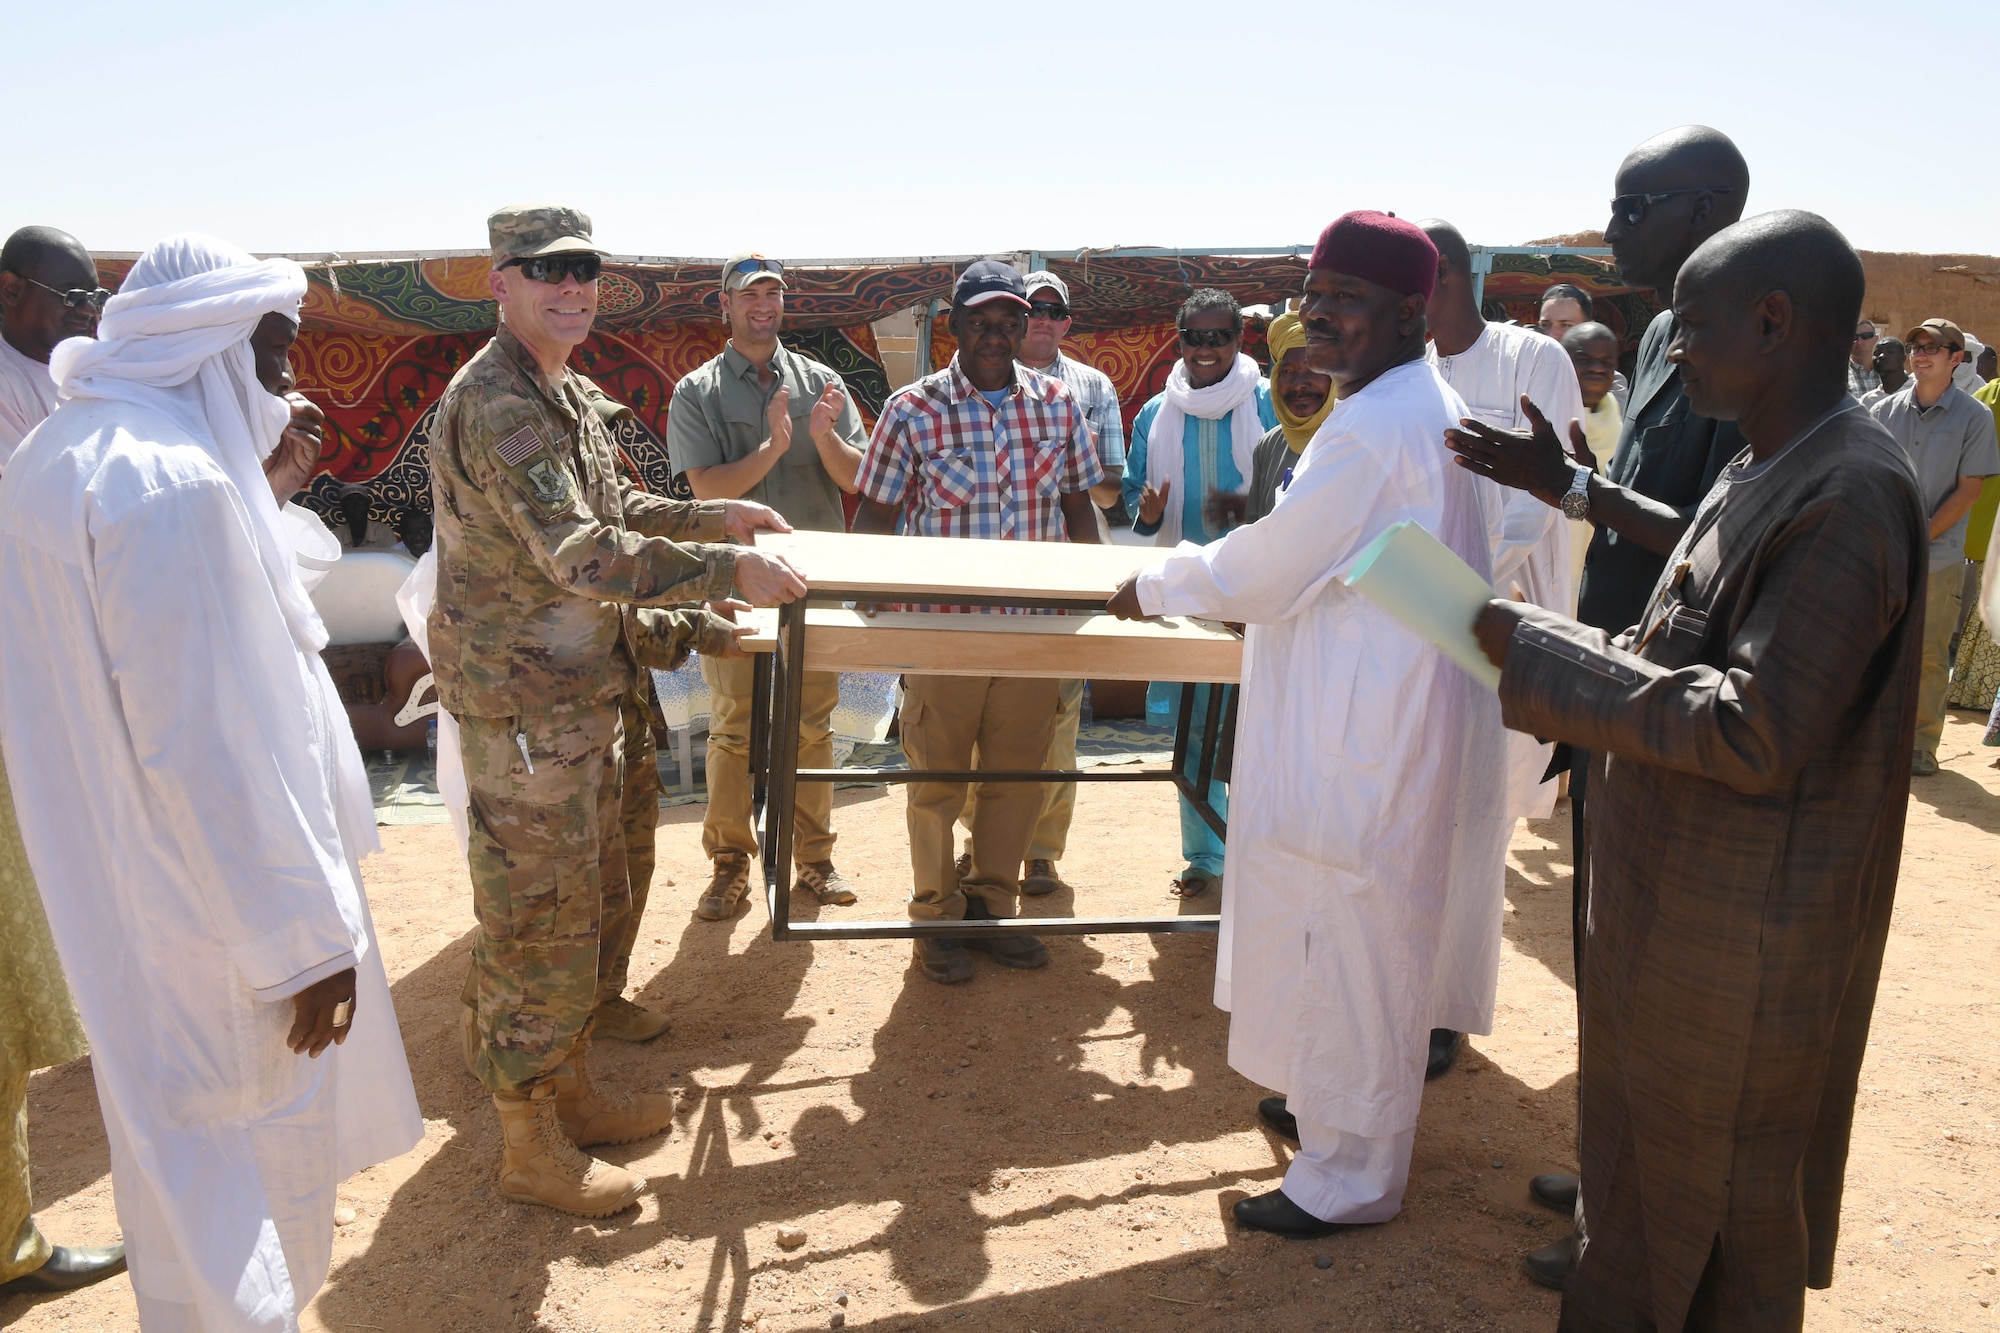 Approximately 300 desks were delivered to Misrata Primary School in Agadez, Niger, as part of a donation coordinated by U.S. Army Civil Affairs Team 203 at Nigerien Air Base 201 Oct. 23.